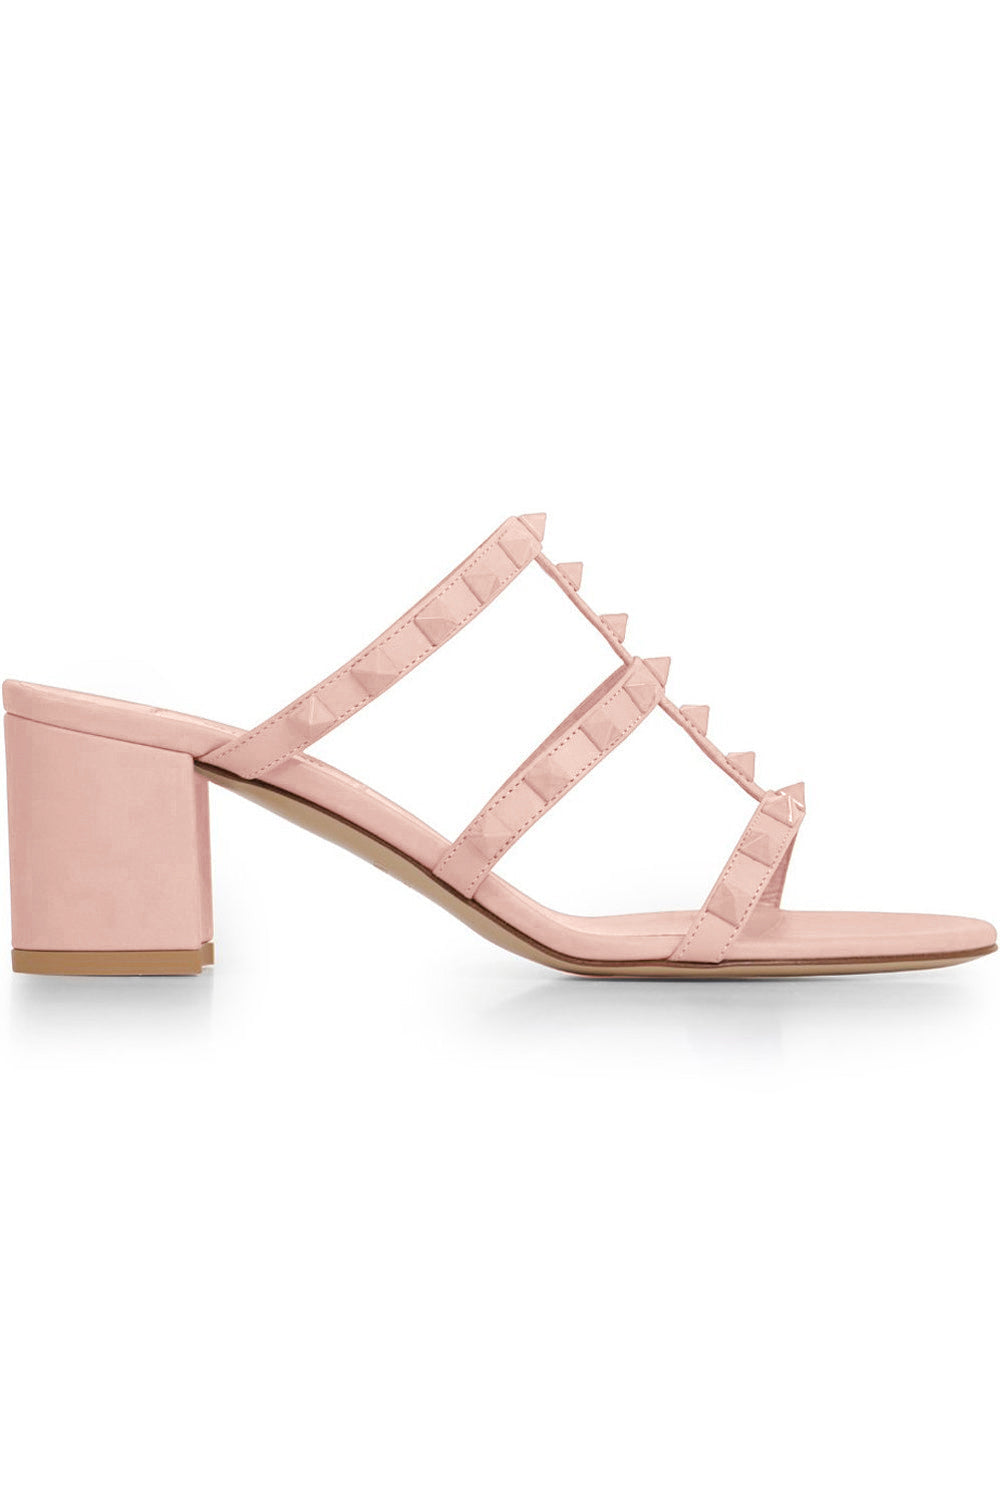 VALENTINO SHOES ROCKSTUD THREE STRAP 60MM MULE | ROSE CANNELLE